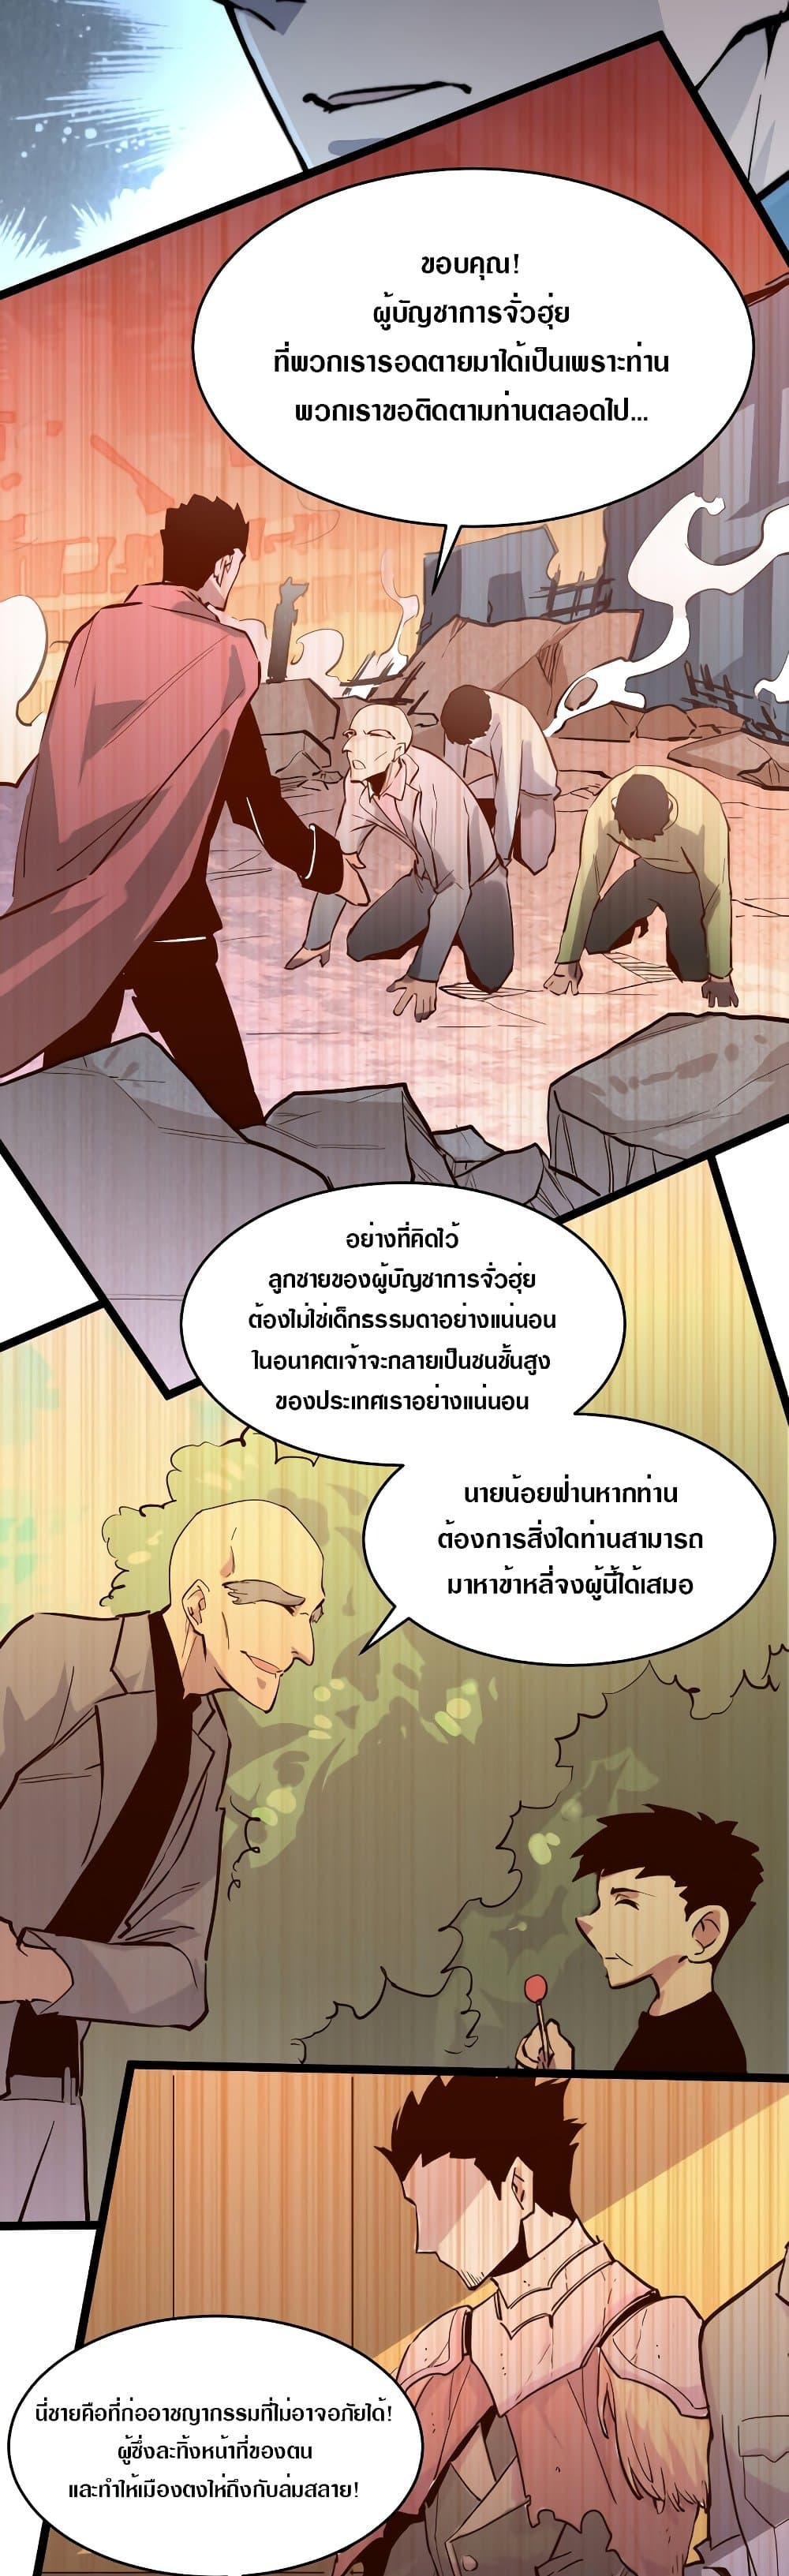 Rise From The Rubble เศษซากวันสิ้นโลก 23-23